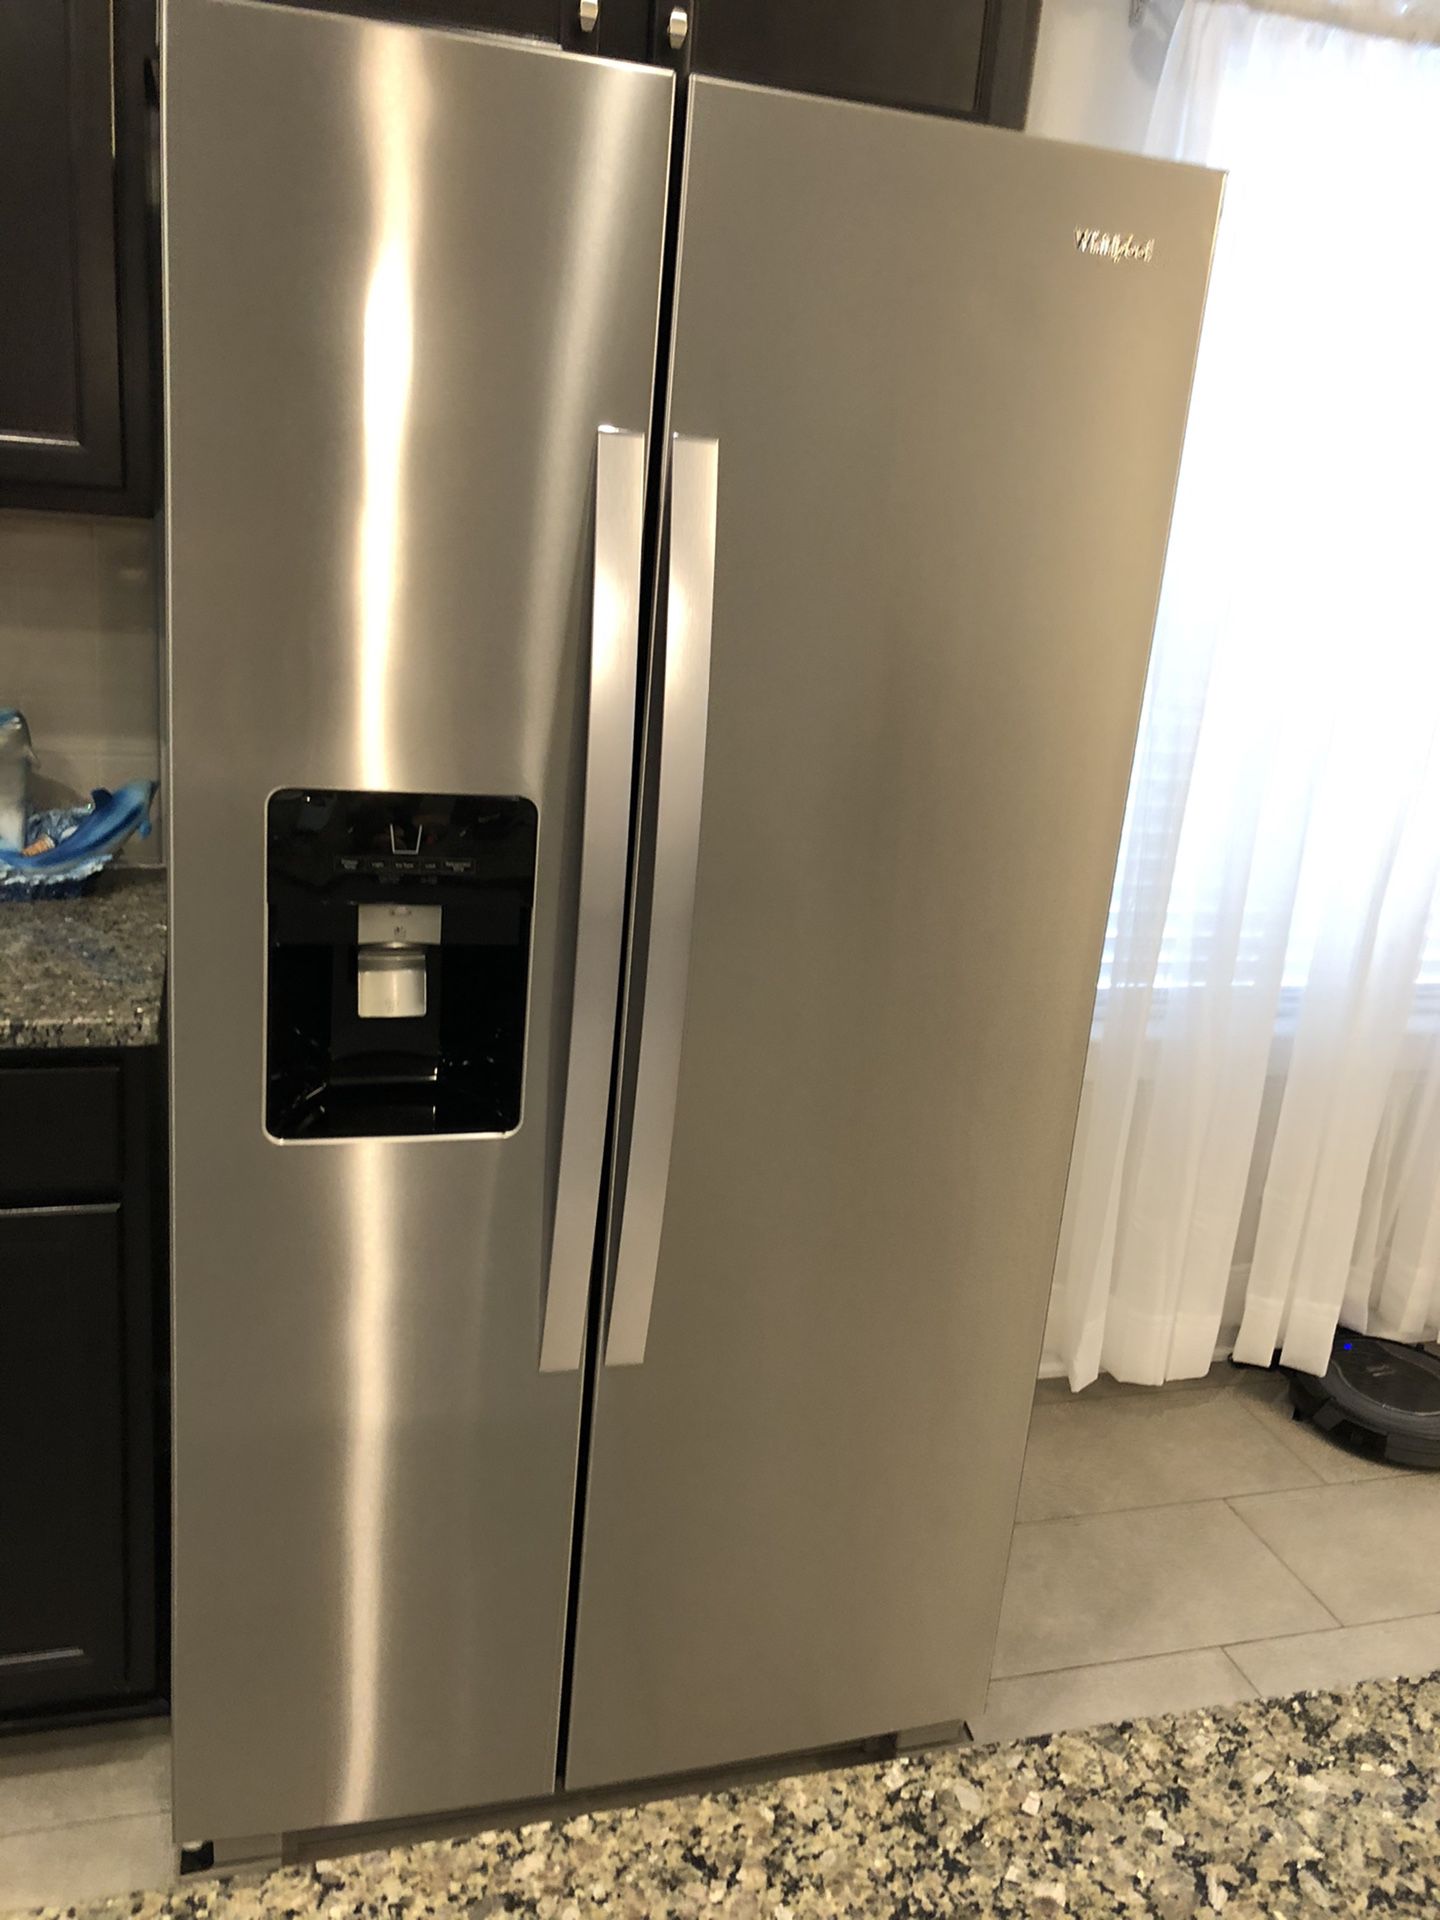 Stainless Whirlpool Side by Side Refrigerator with in door water and ice maker.